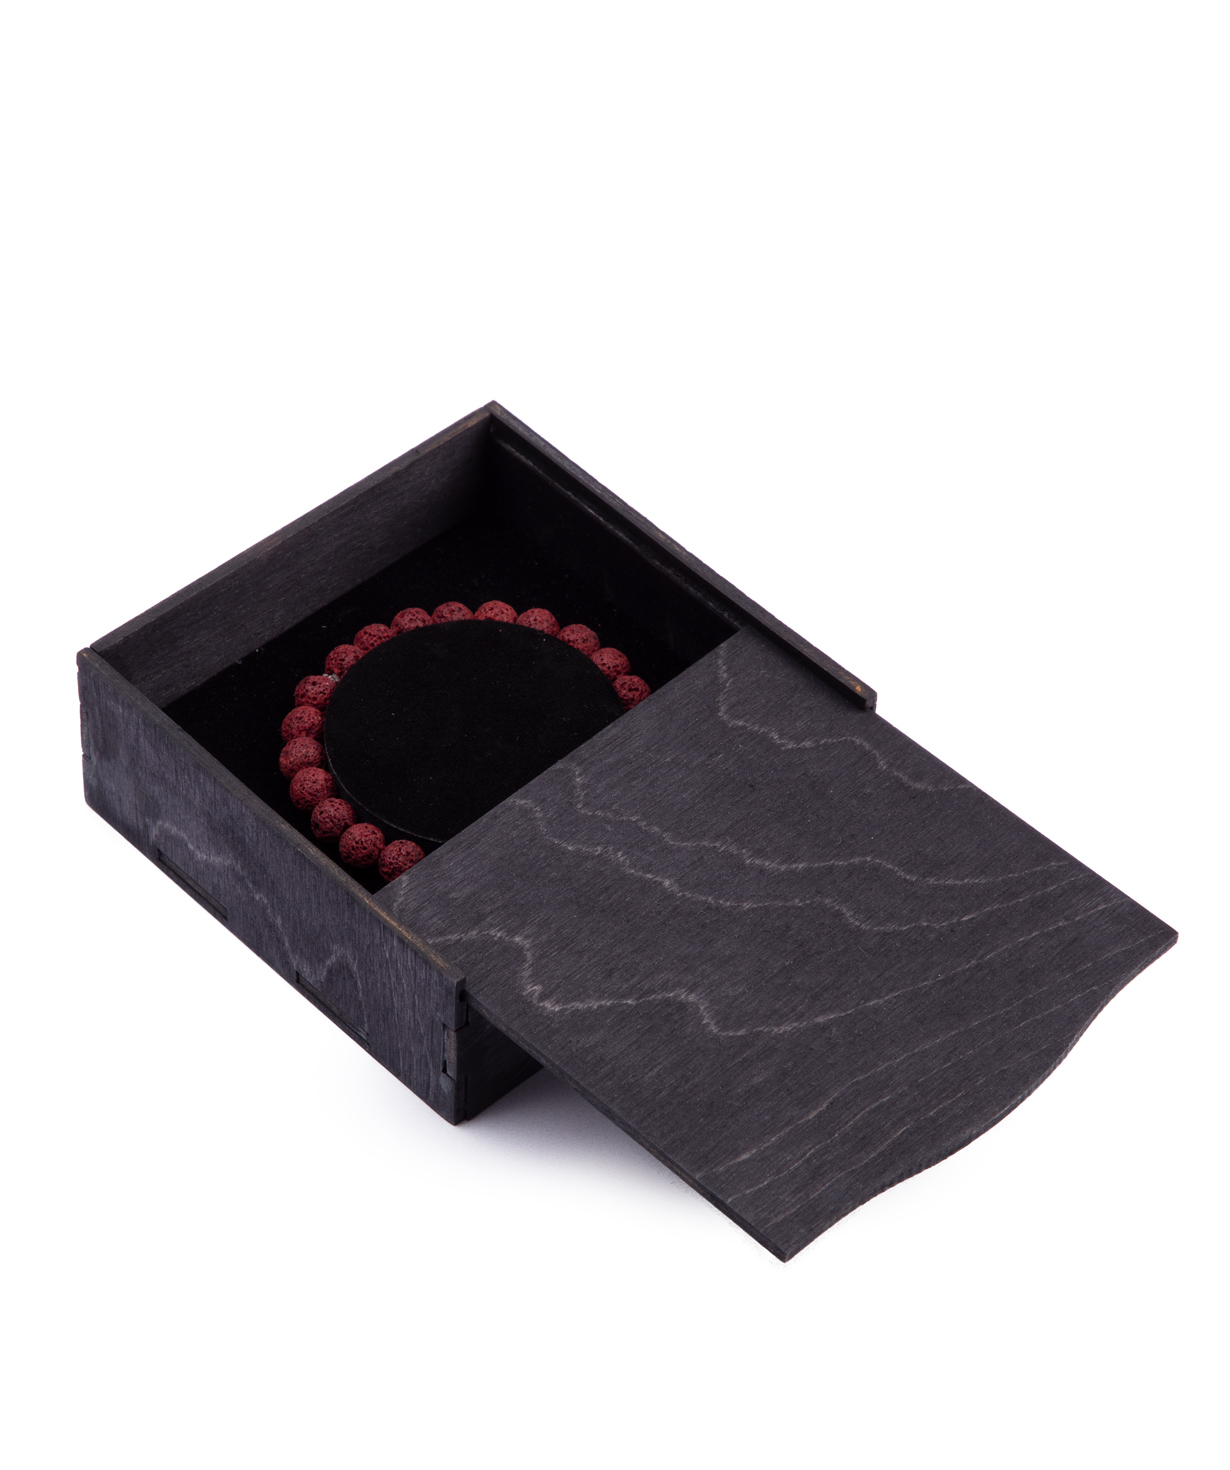 Womens bracelet with natural stones